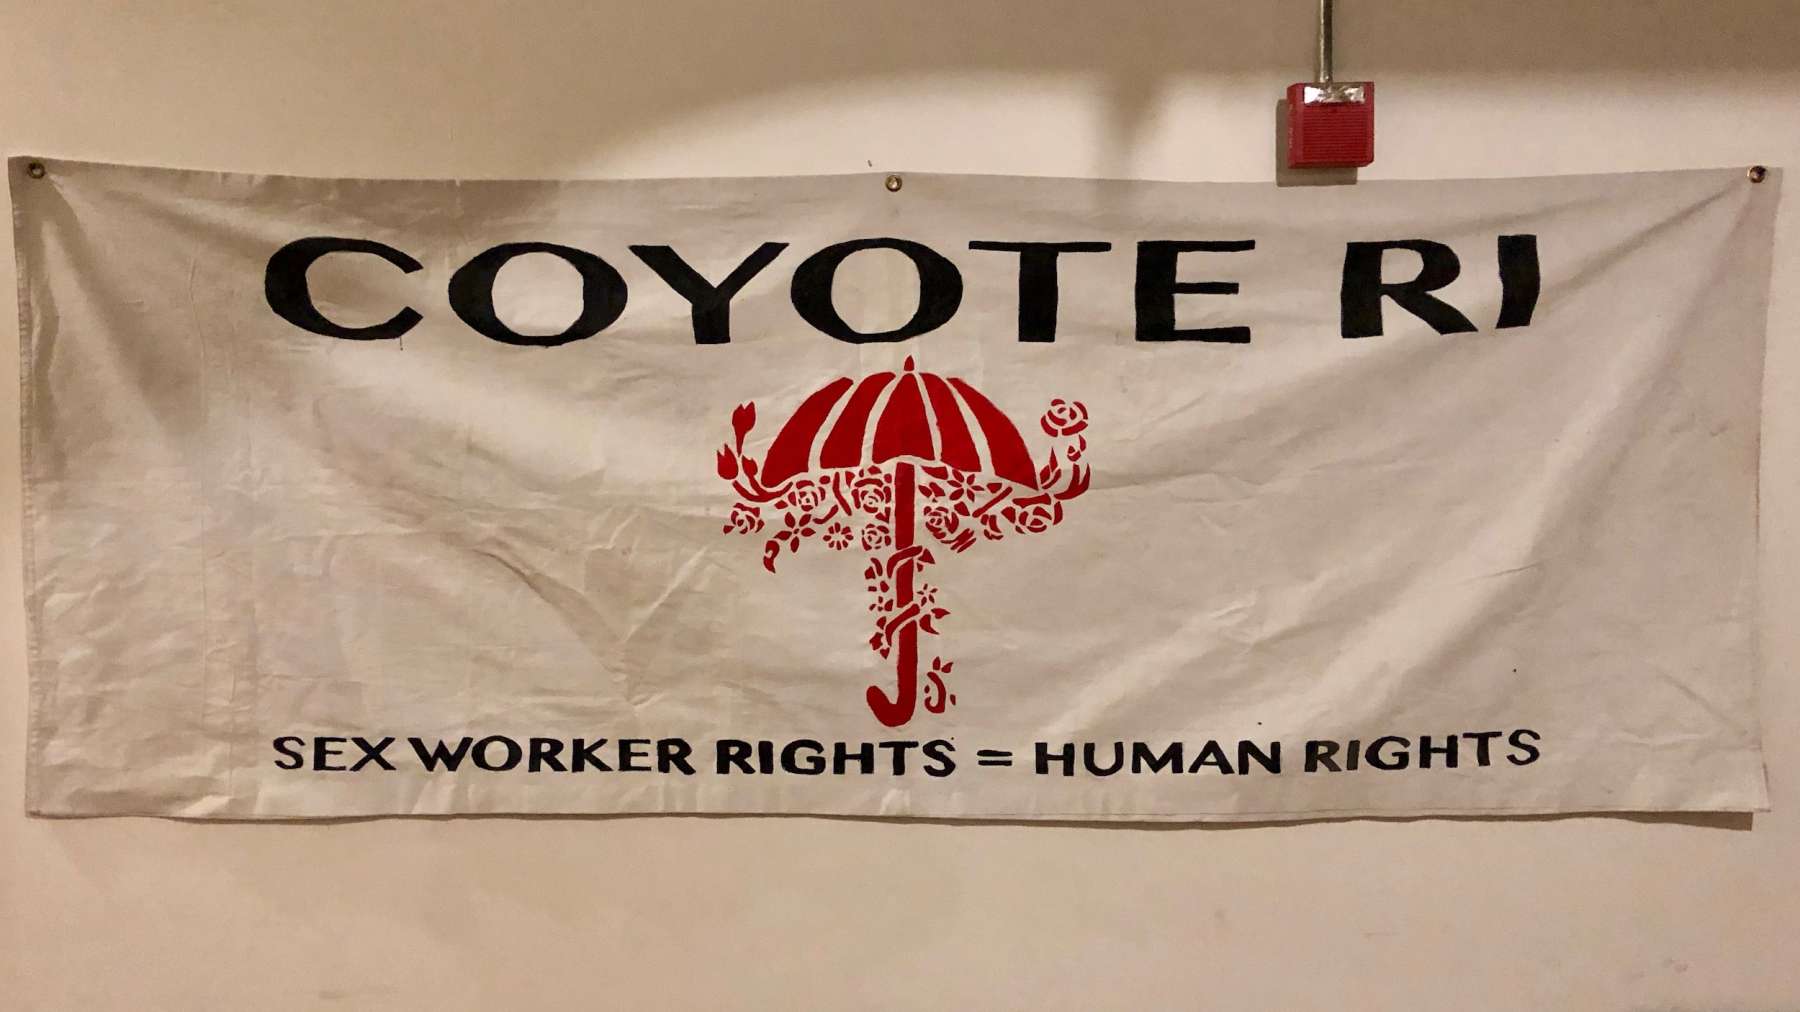 Rhode Island News: COYOTE RI urges DC Circuit Court to overturn harmful sex trafficking law